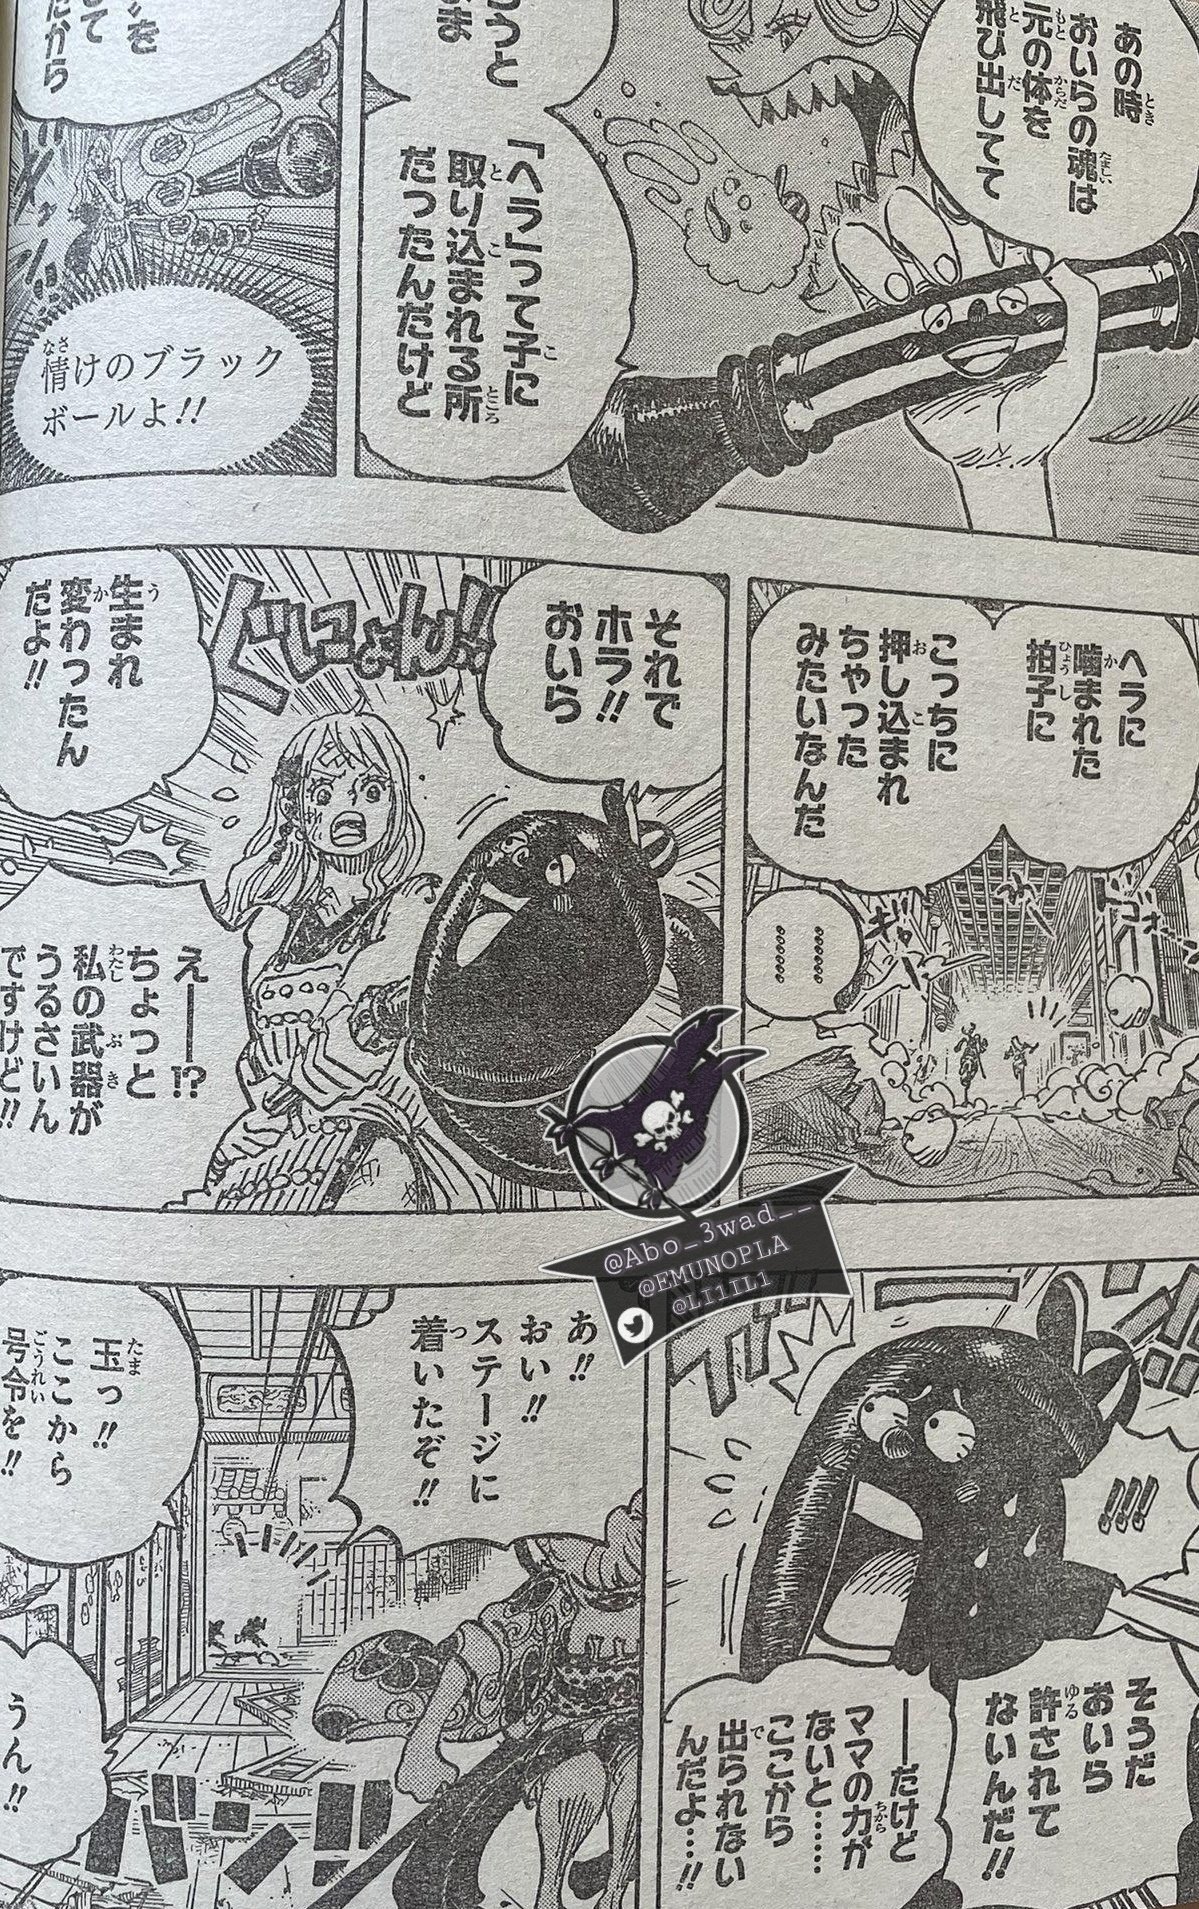 Spoiler One Piece Chapter 1016 Spoilers Discussion Page 229 Worstgen